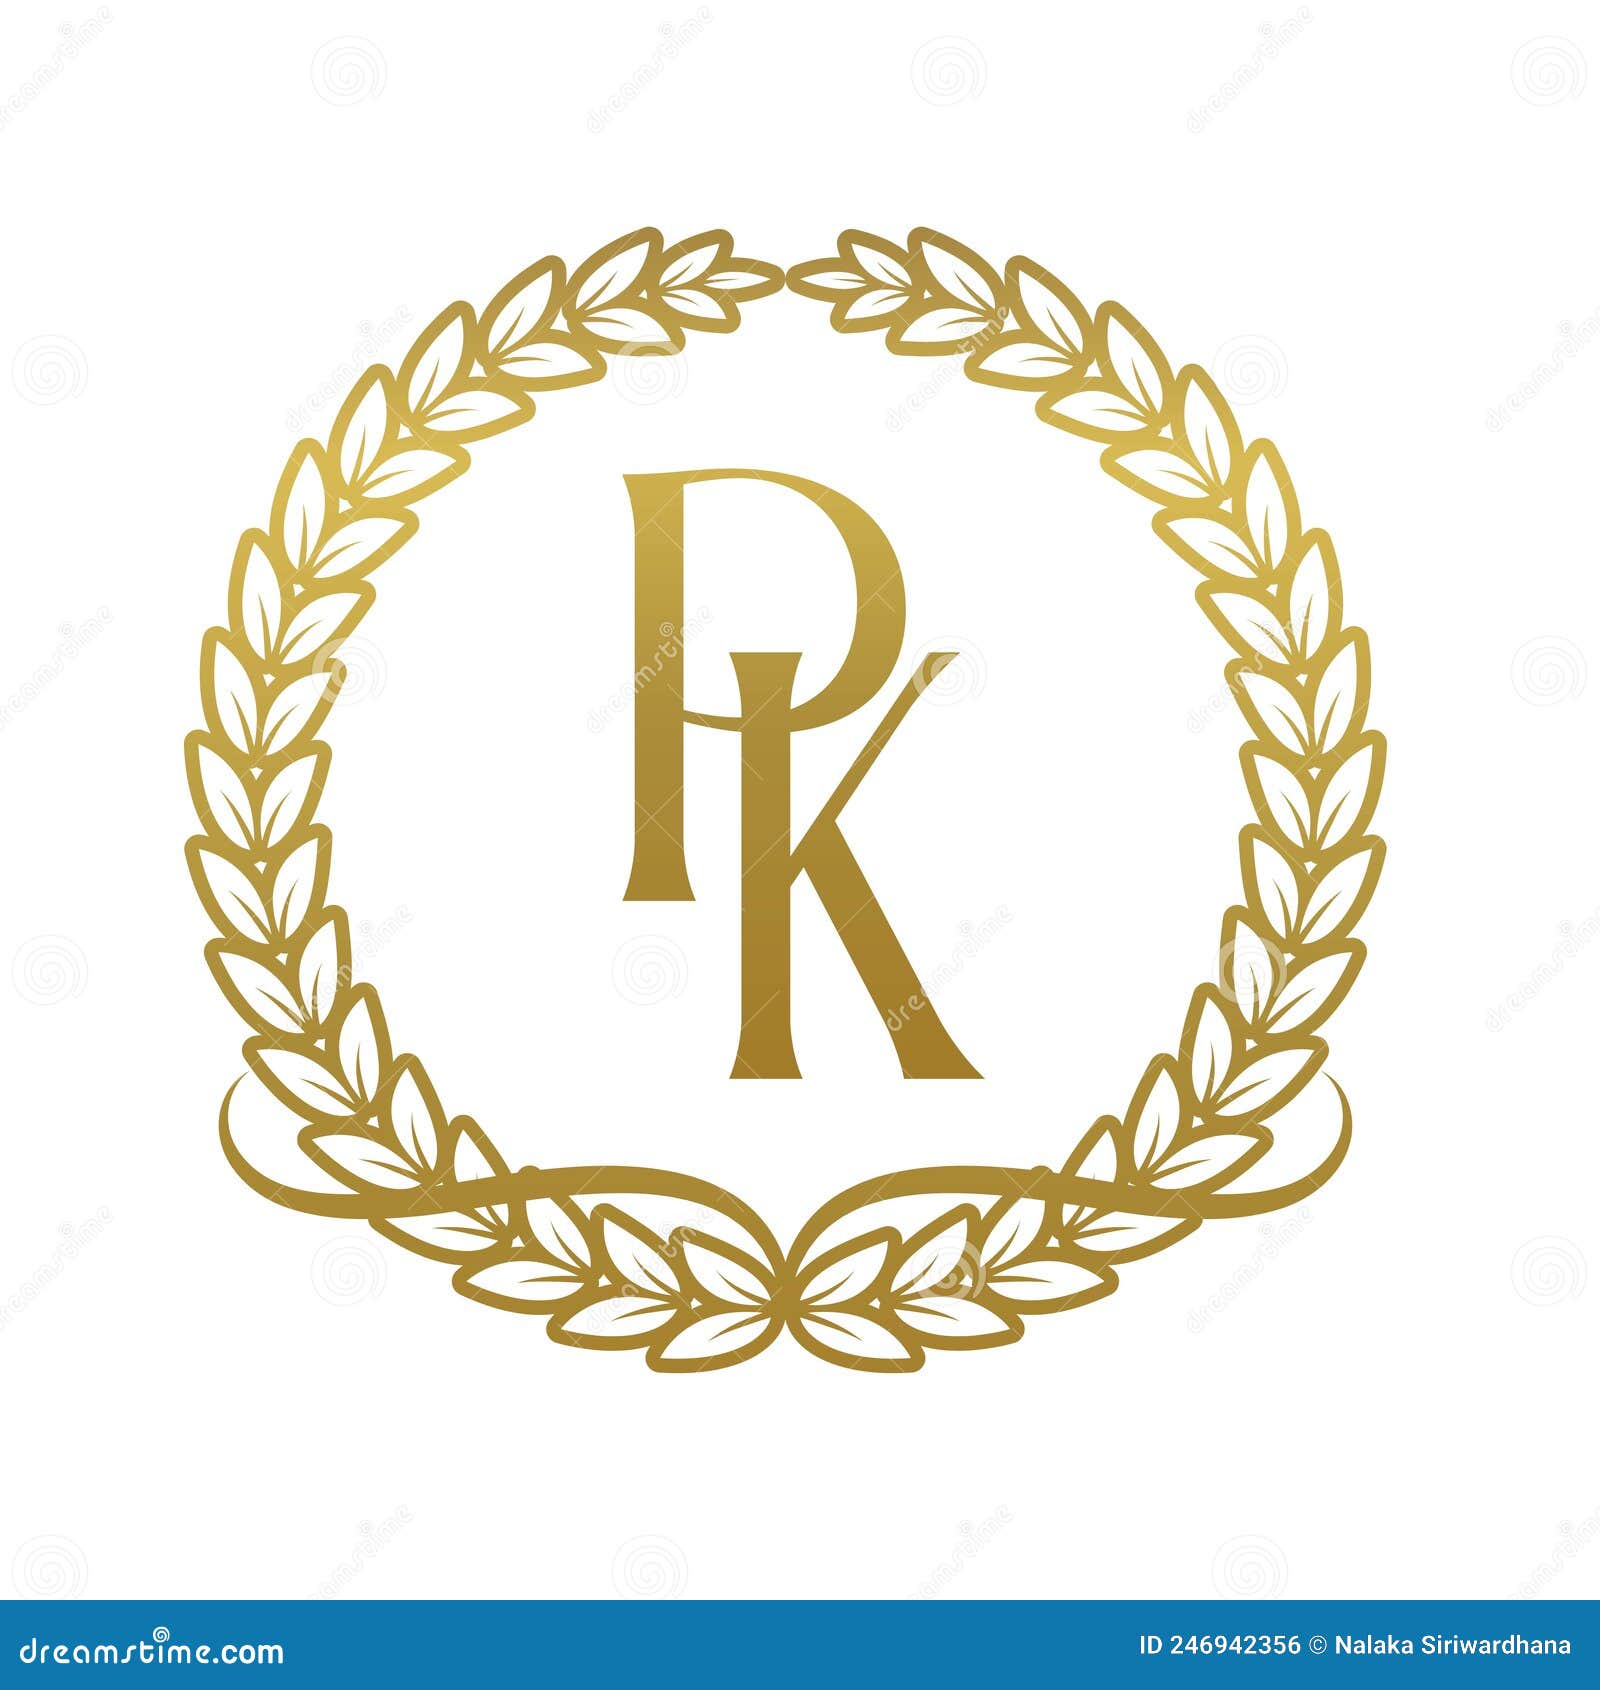 Initial Logo Letter PM With Golden Color With Laurel And Wreath